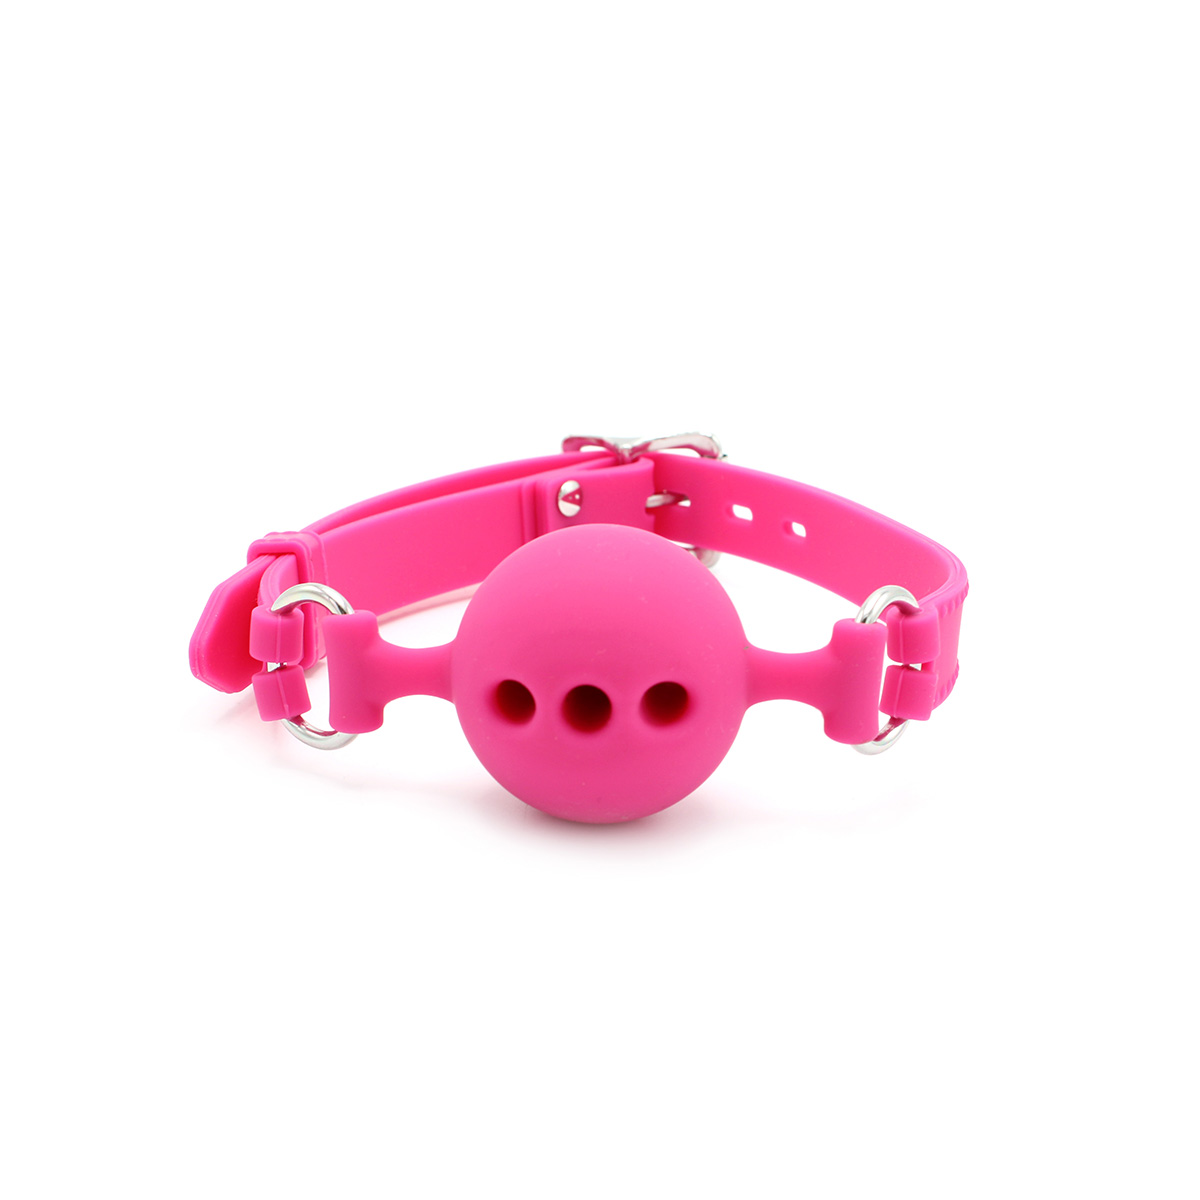 Silicone-Ball-Gag-with-Holes-Pink-OPR-2050065-1